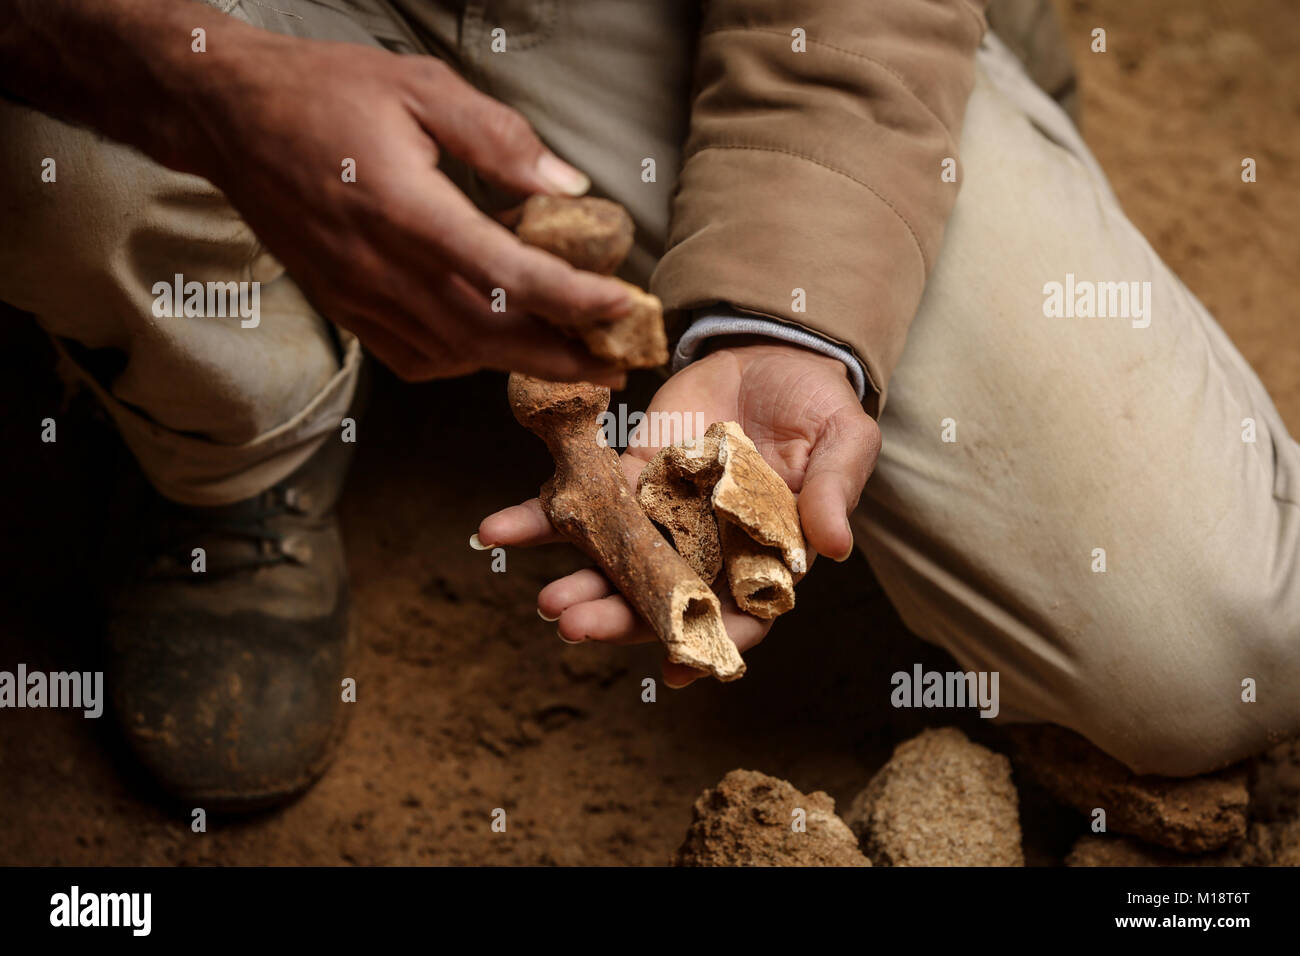 Beit Hanoun, Gaza. 27th Jan, 2018. A Palestinian man holds pottery fragments at a freshly-discovered cemetery which was found by Abdelkarim al-Kafarna in his backyard in town of Beit Hanoun, in the northern Gaza strip on January 27, 2018. Experts said the graves were part of a loculus tomb that possibly dates from the late Roman-Byzantine era in the fourth to sixth century CE where Gaza was part of the far-flung Roman Empire. Credit: Nidal Alwaheidi/Pacific Press/Alamy Live News Stock Photo